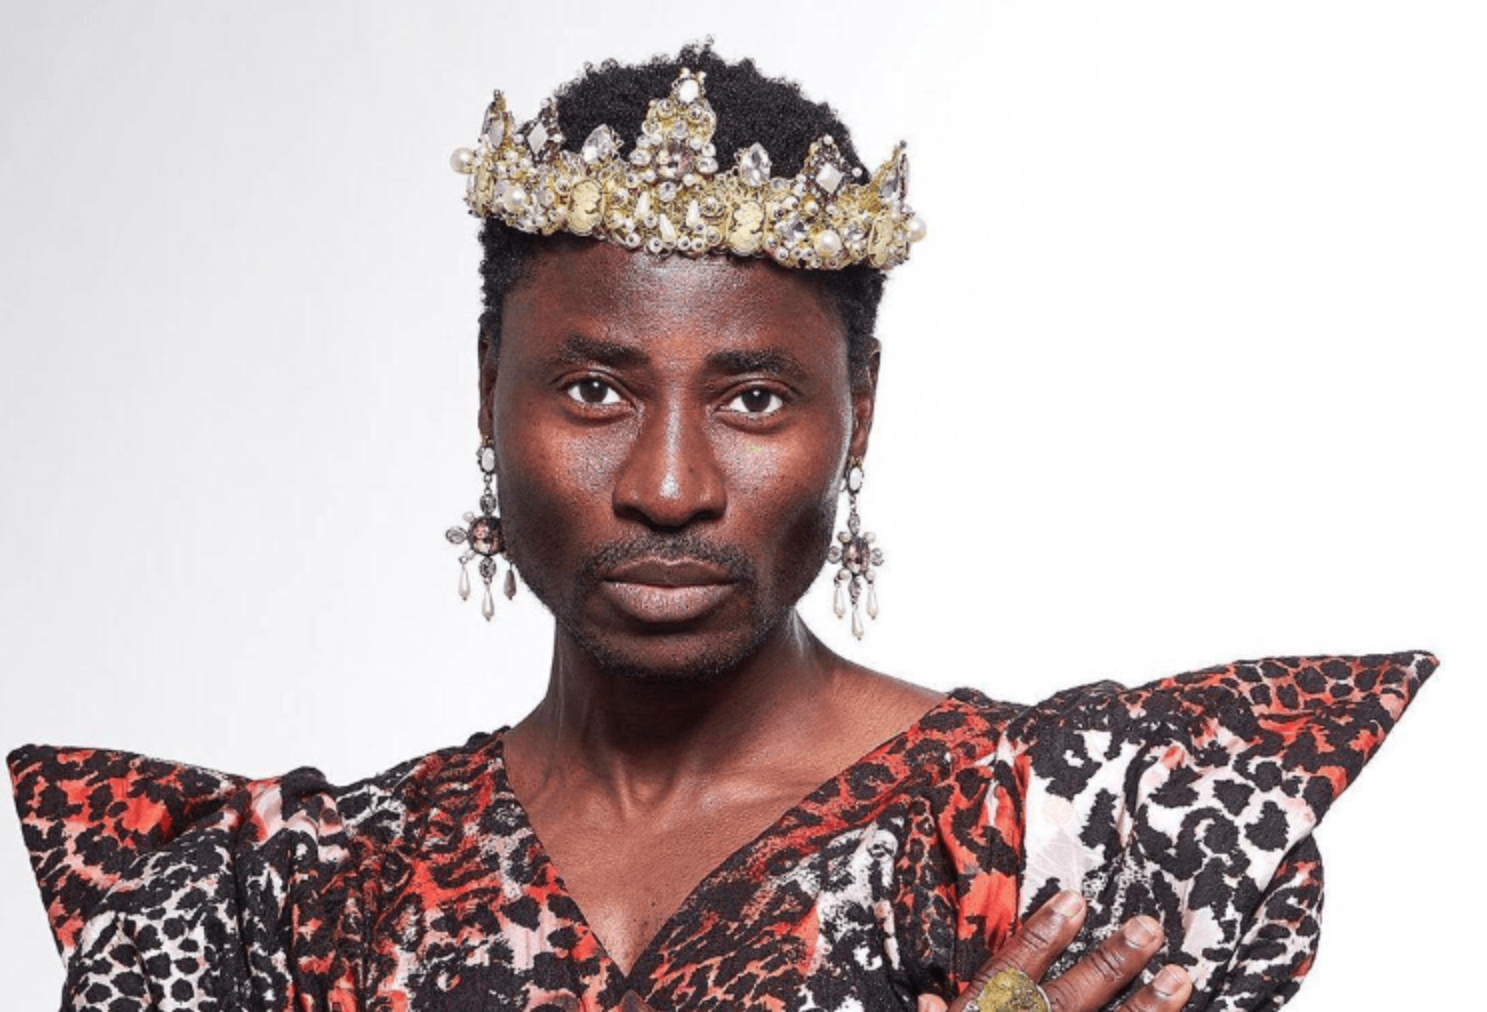 Stop Putting Bibles In Hotel Rooms, It’s Rude – Gay Activist Bisi Alimi Warns